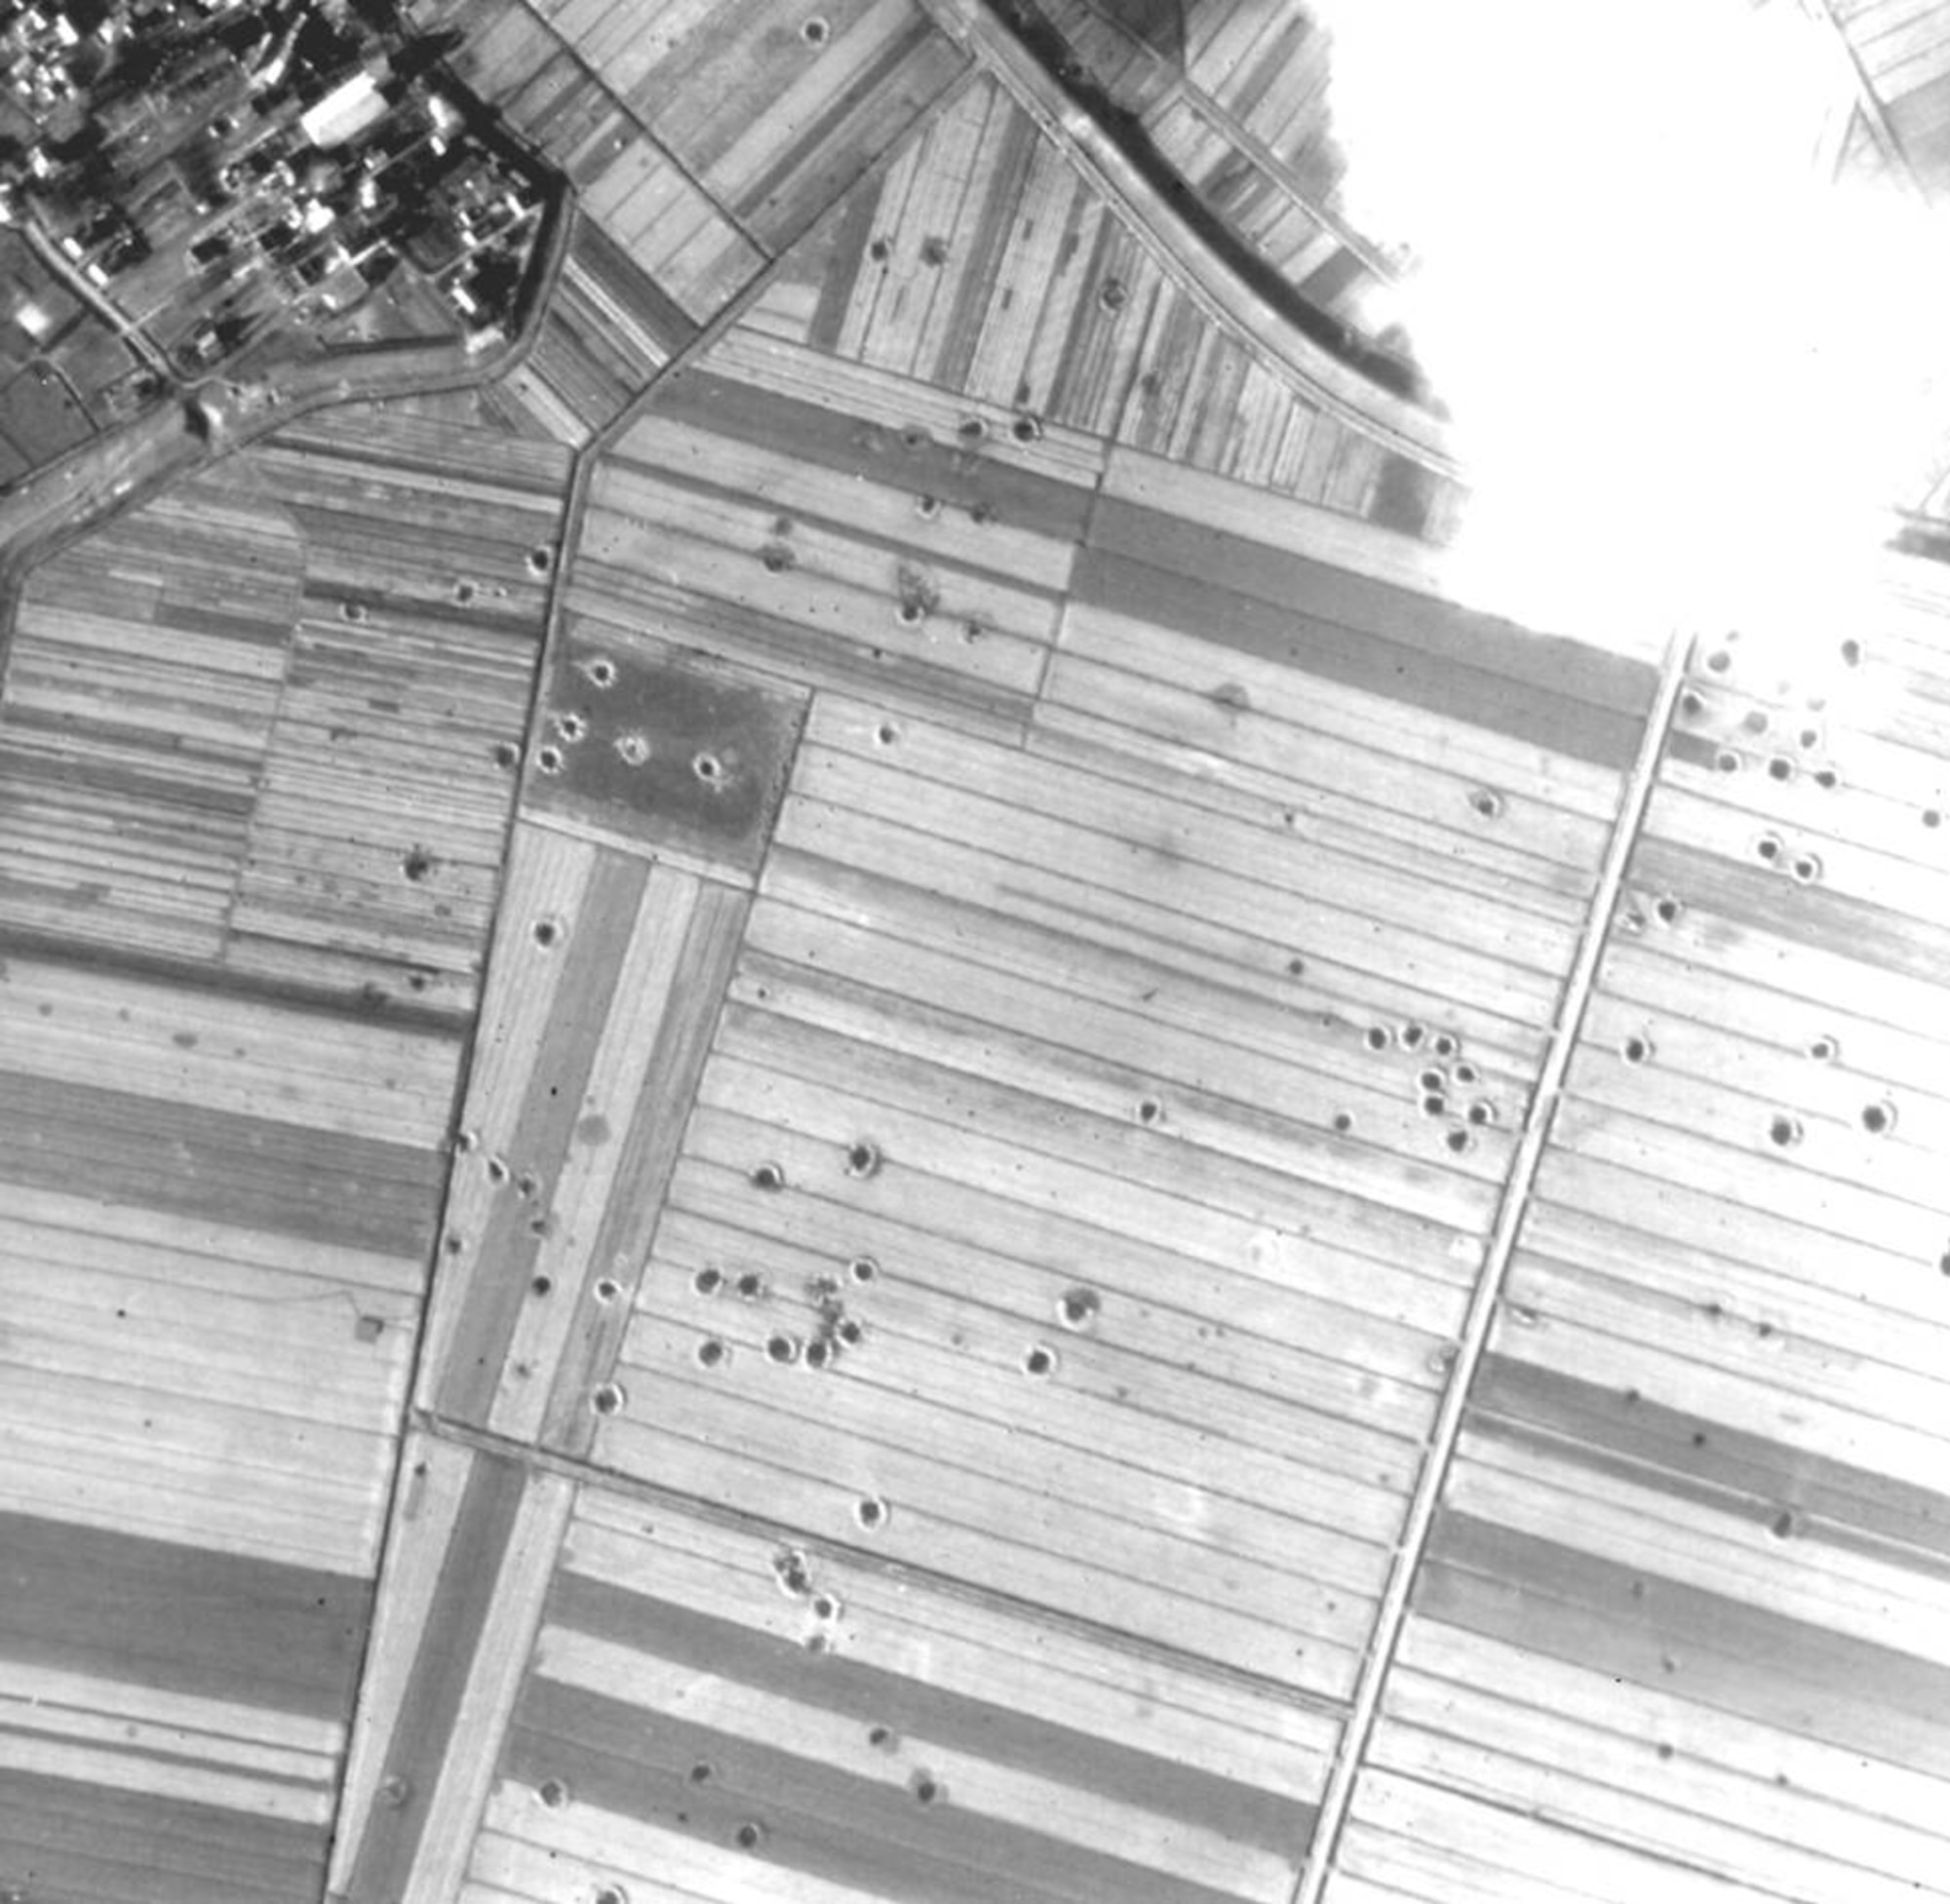 A World War II aerial photograph taken after a bombing mission of Germany shows craters created by bombs exploding and smaller holes resulting from bombs that did not explode on impact. Photos like this from the Air Force Historical Research Agency are key in determining whether an area in Germany is safe for commercial development. (Courtesy photo)